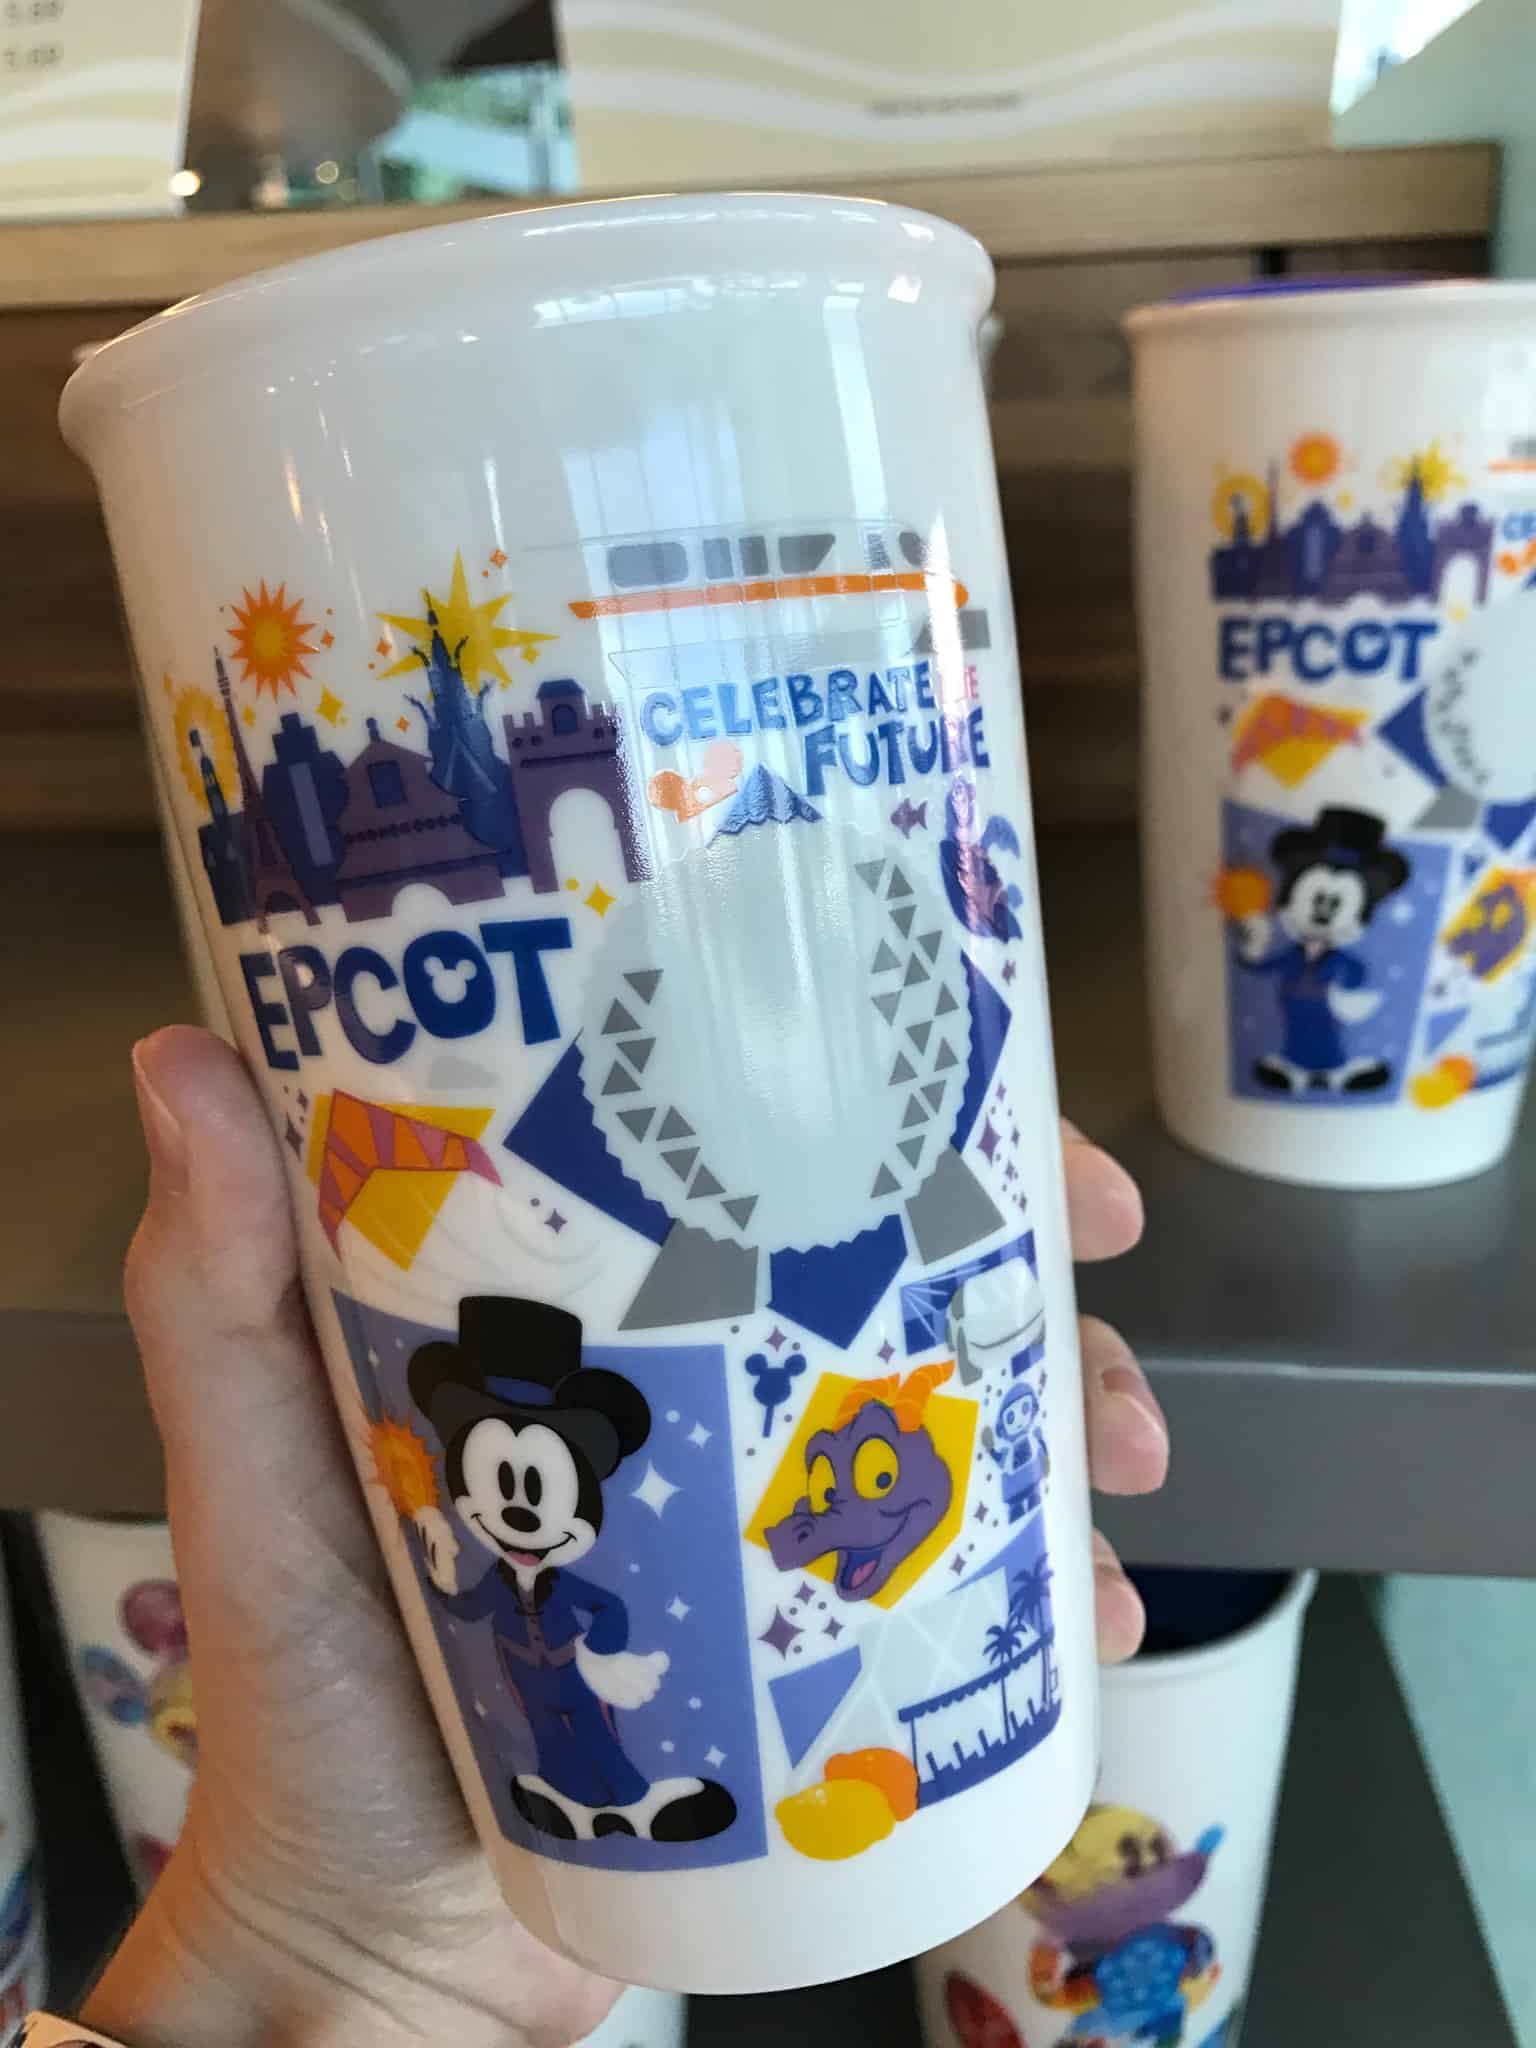 Wdw News Today Photos New Starbucks Ceramic Tumblers Arrive At Epcot T Co Ojszks1aud